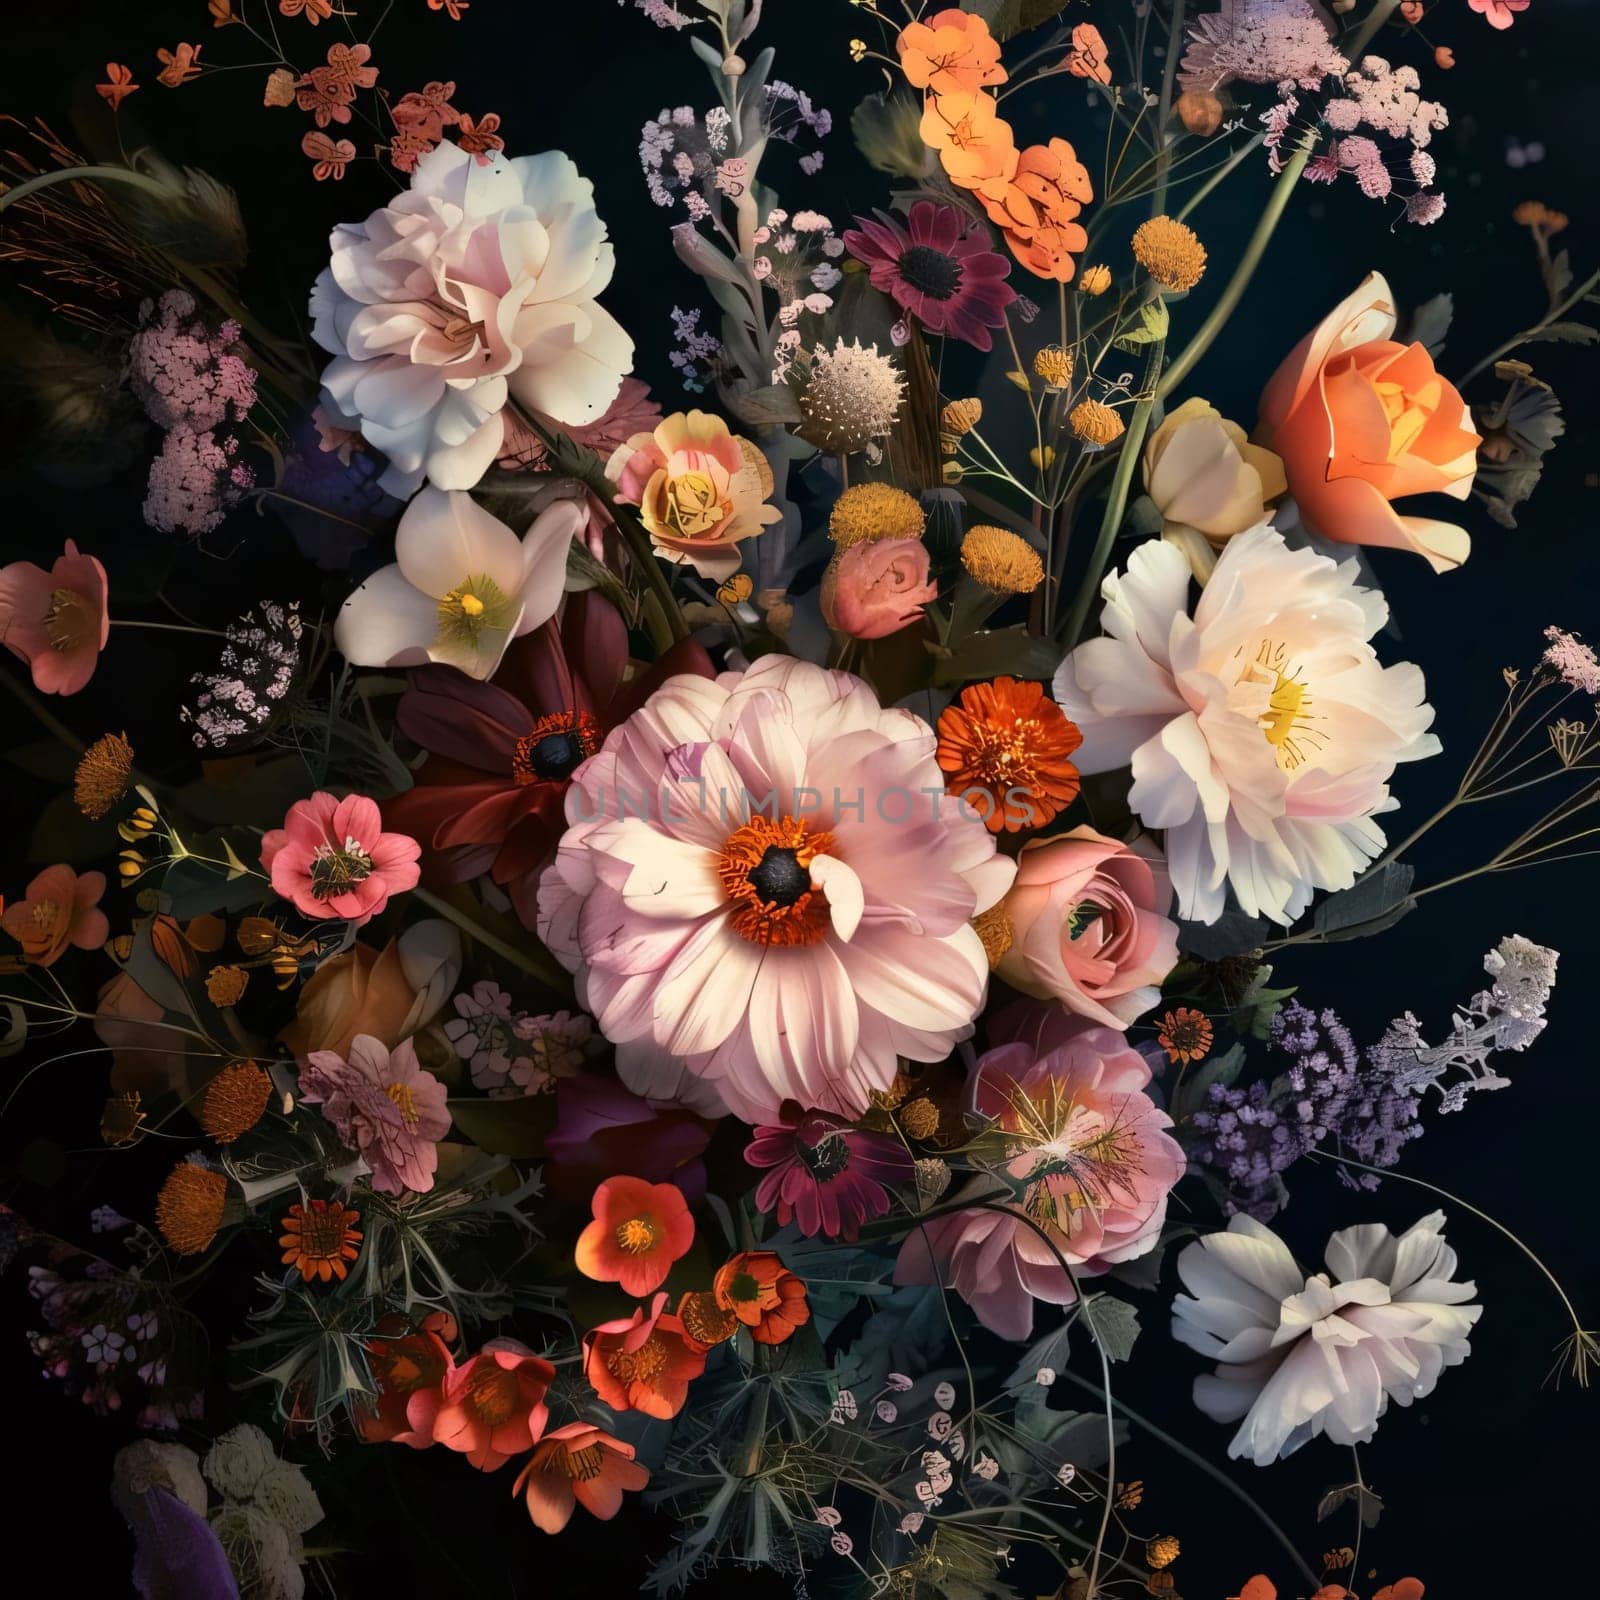 A bouquet of colorful field flowers on a dark background. Flowering flowers, a symbol of spring, new life. by ThemesS